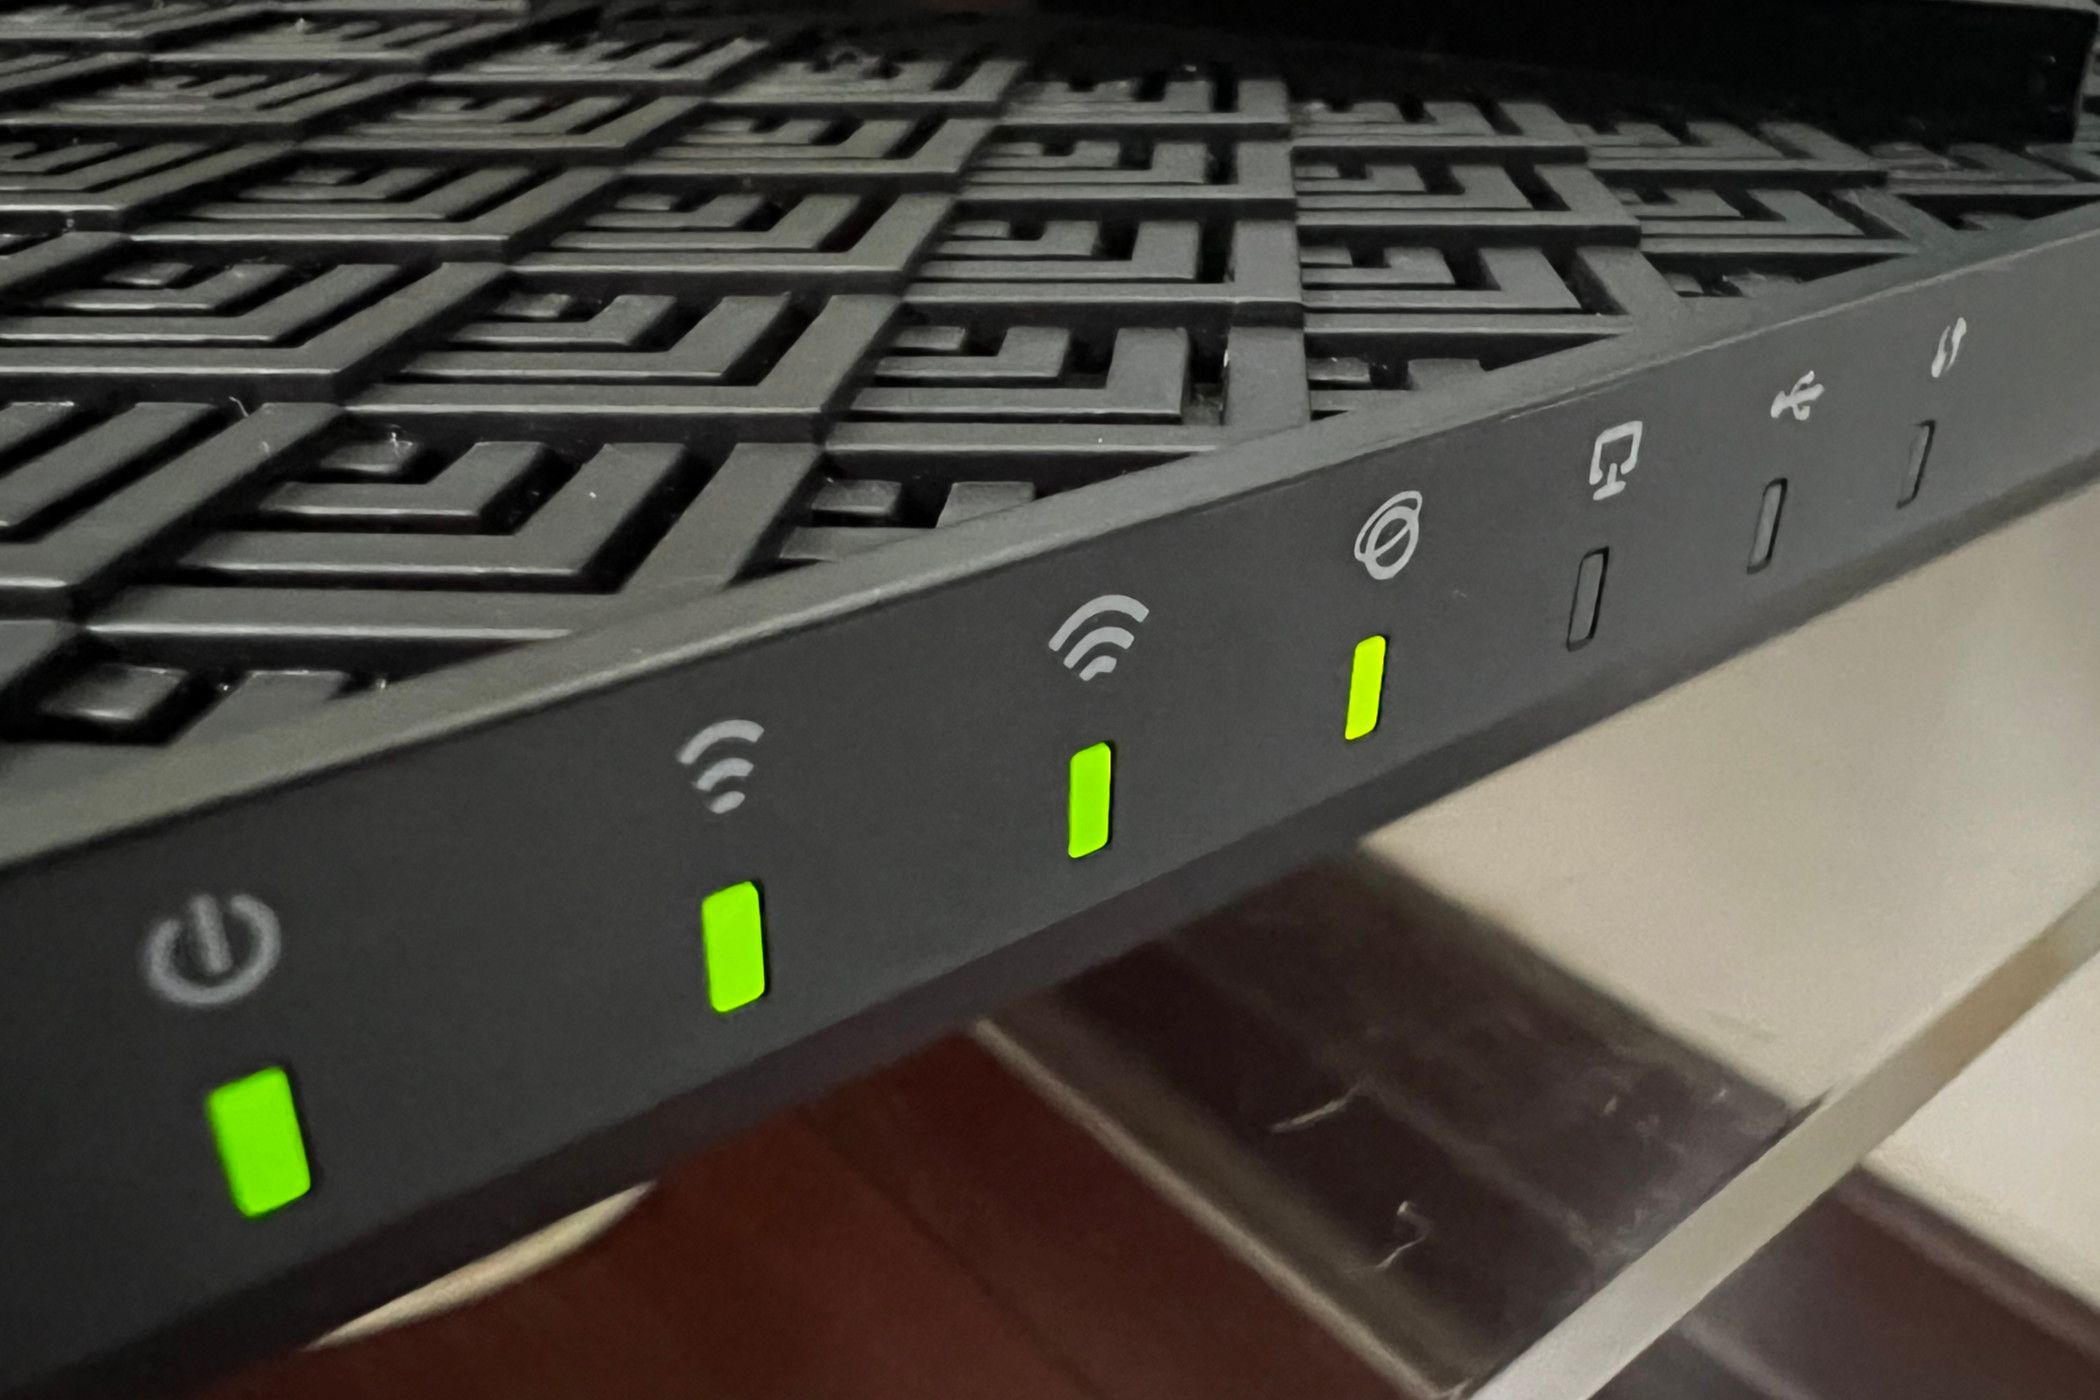 TP Link AX72 router with four green lights.